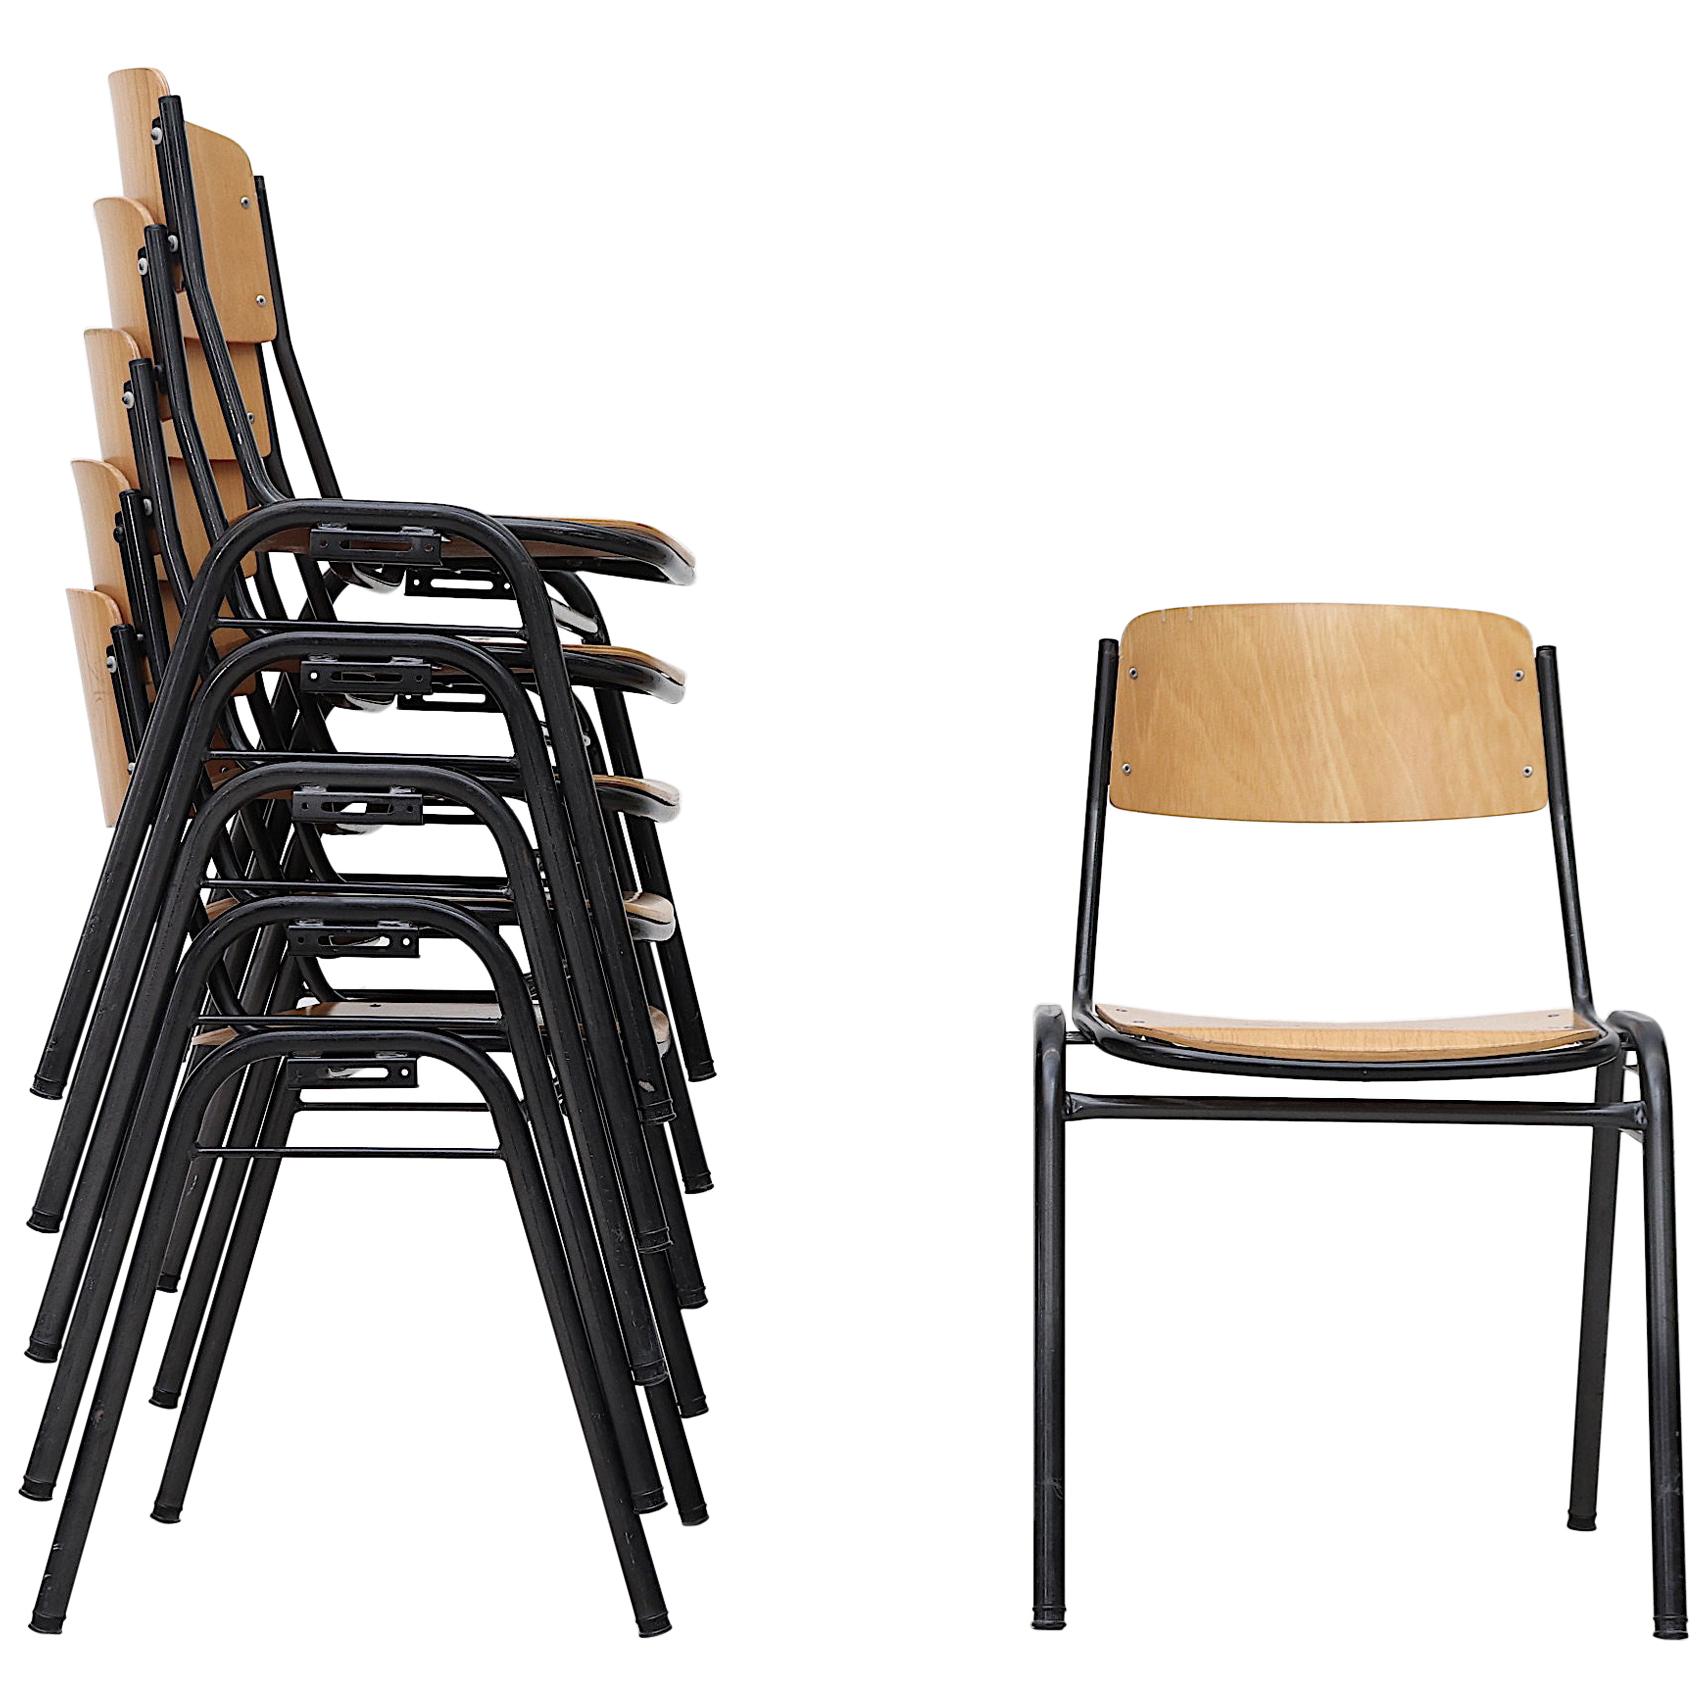 Blonde Plywood Industrial Stacking Chairs with Enameled Metal Frames